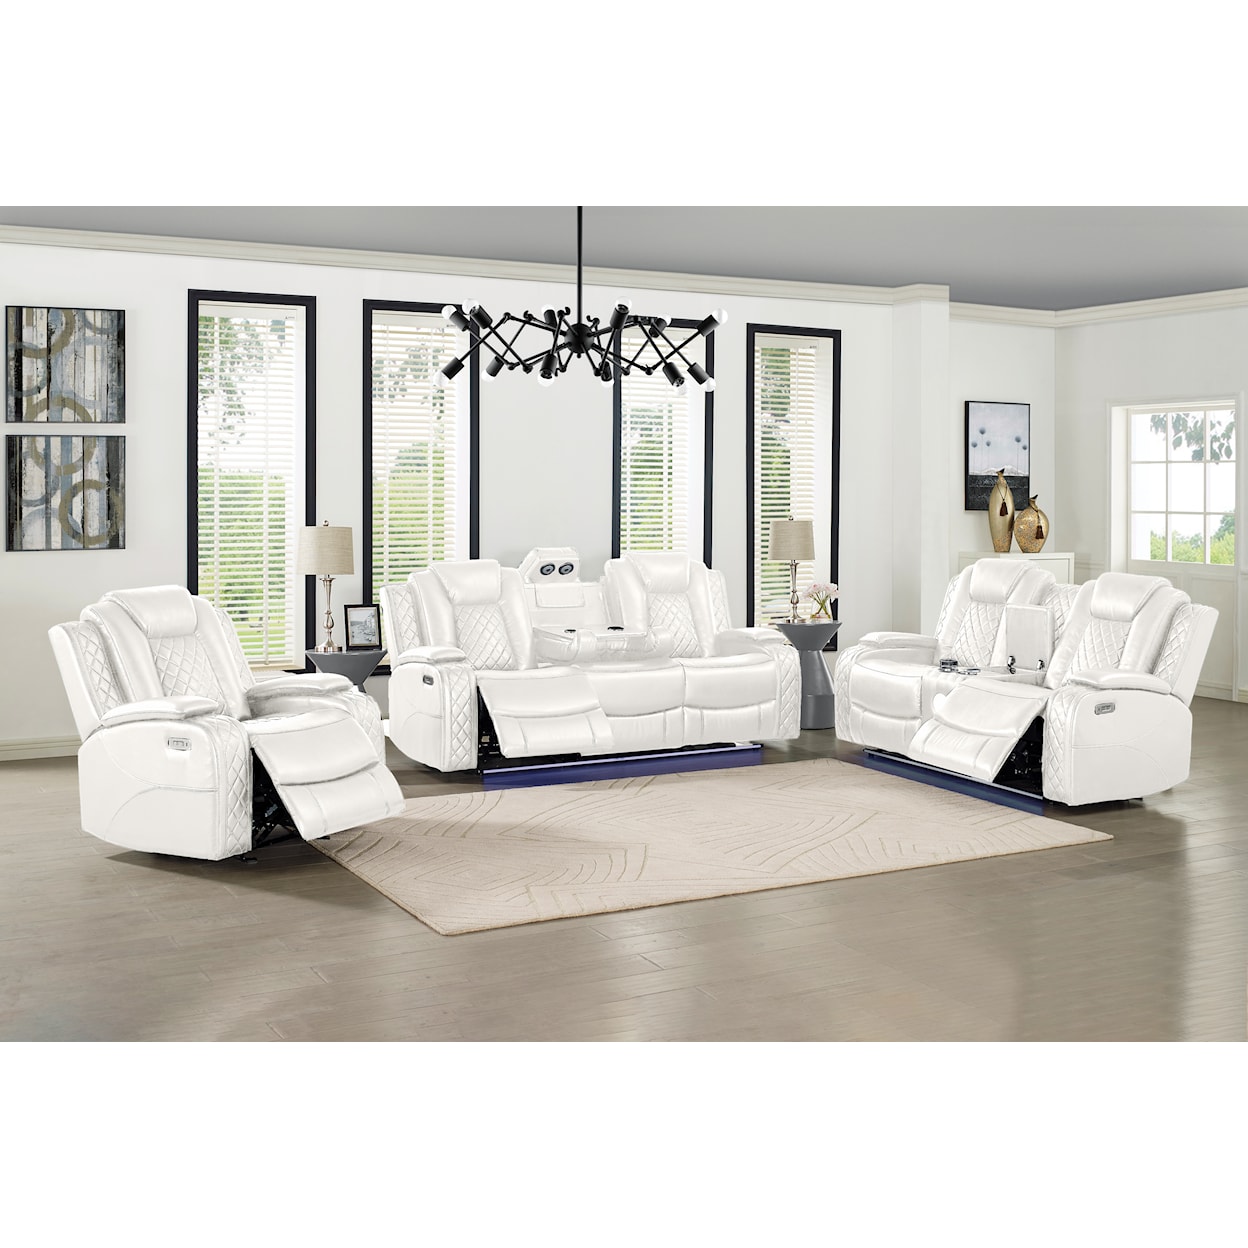 New Classic Orion Console Loveseat